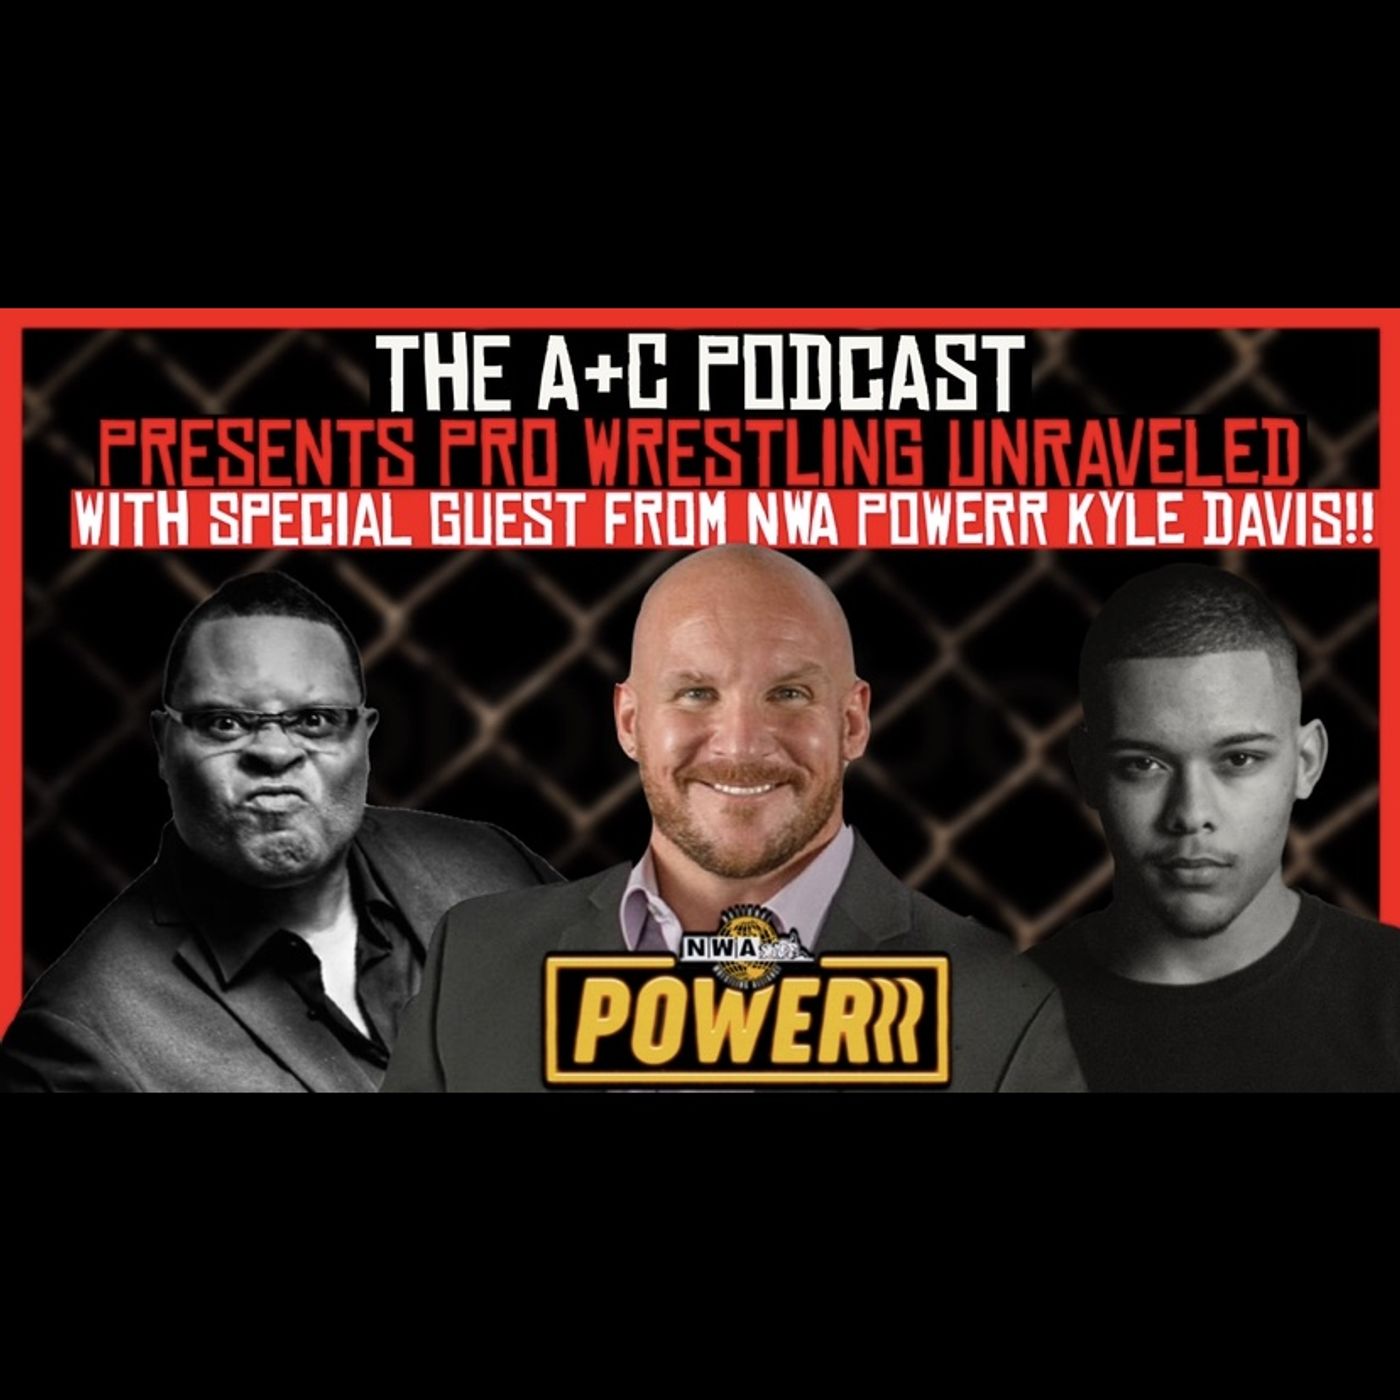 NWA Powerrs Kyle Davis!! His Time In ROH | How He Became A Interviewer | Adam Pierce & Billy Corgan!